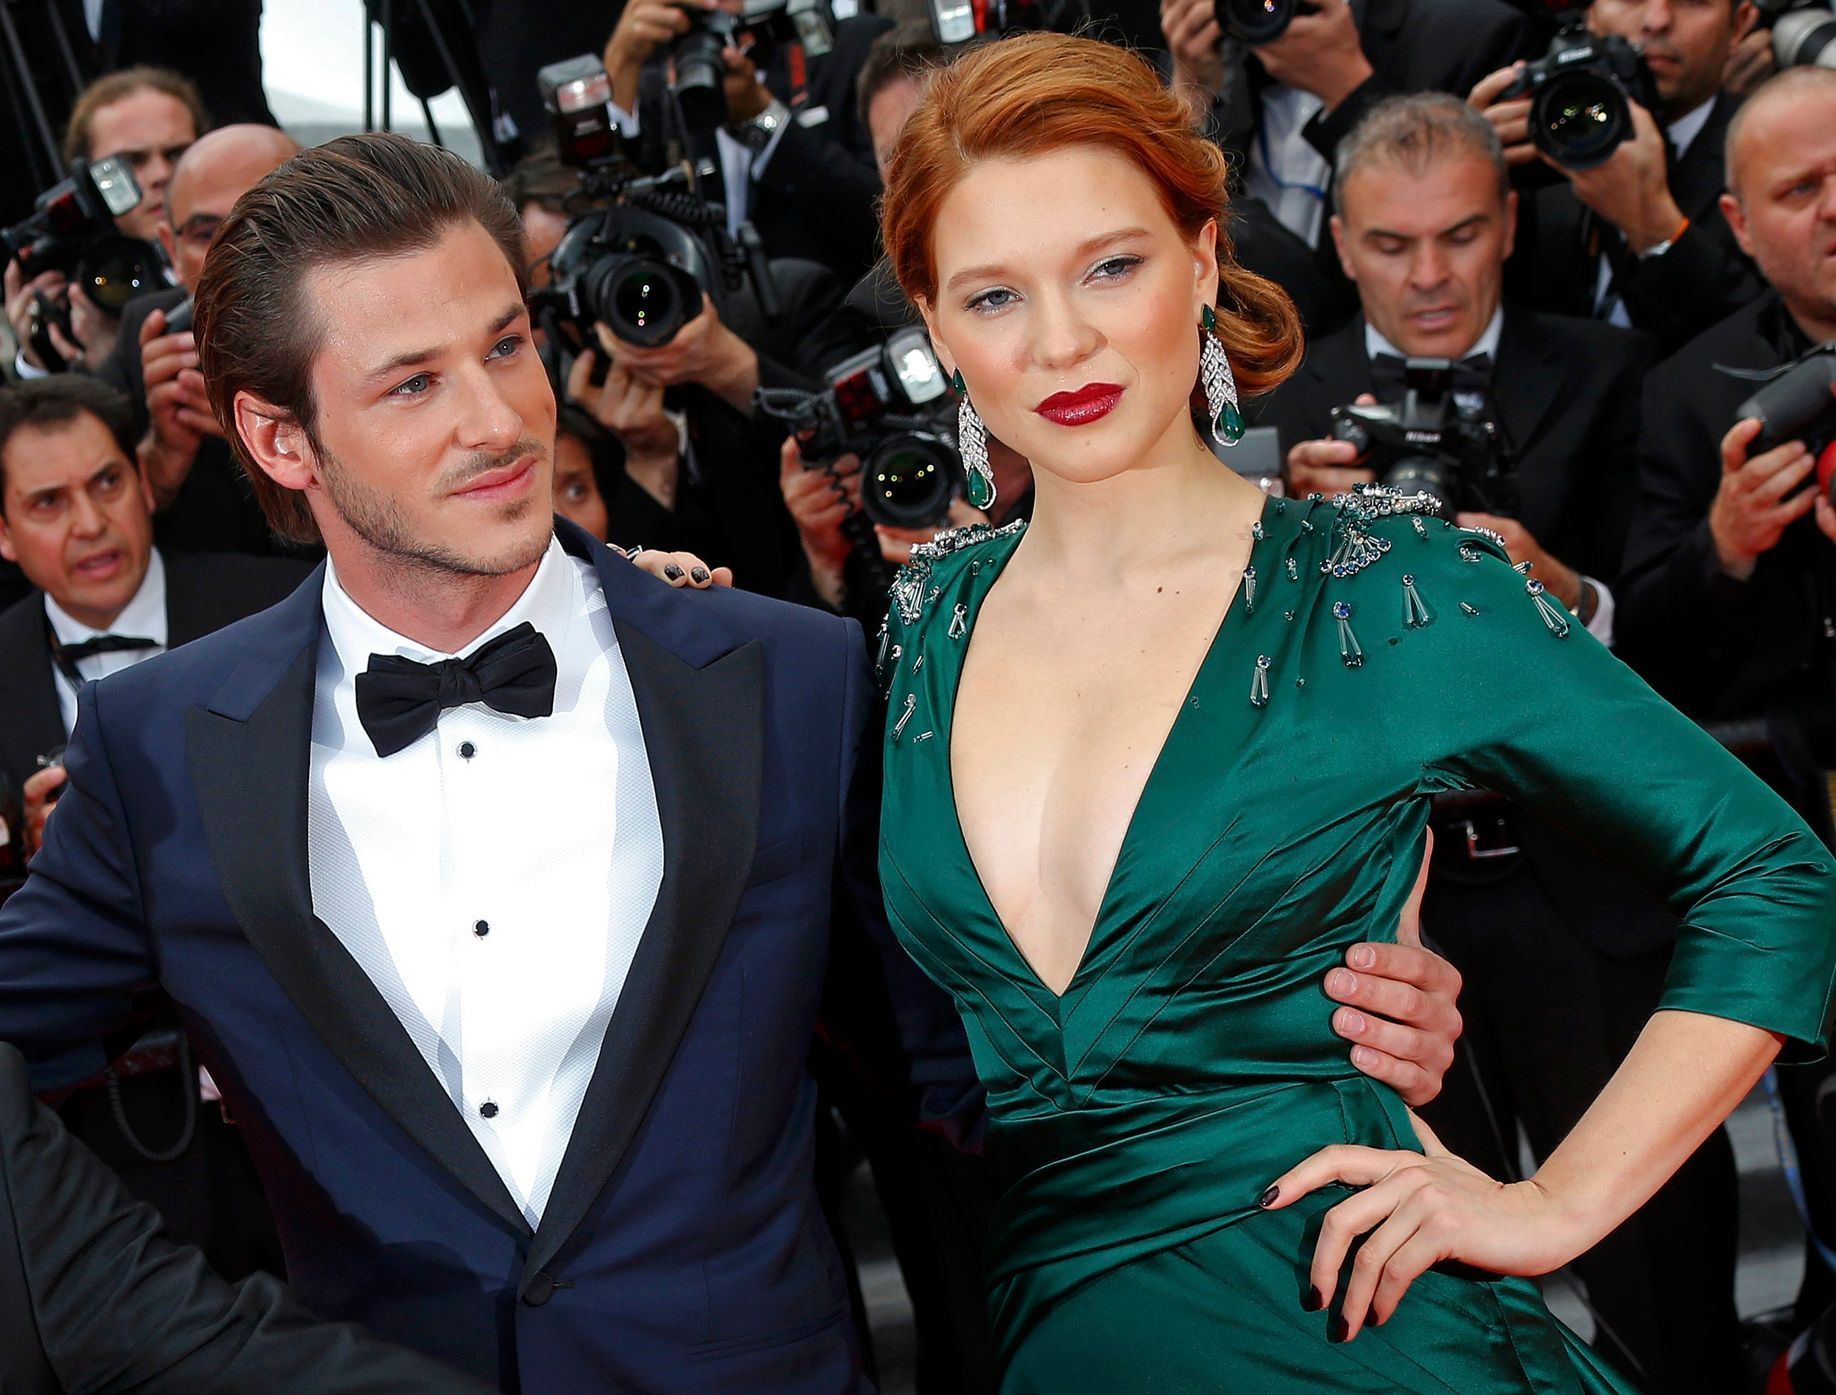 Cast members Gaspard Ulliel and Lea Seydoux pose on the red carpet as they arrive for the screening of the film &quot;Saint Laurent&quot; in competition at the 67th Cannes Film Festival in Cannes